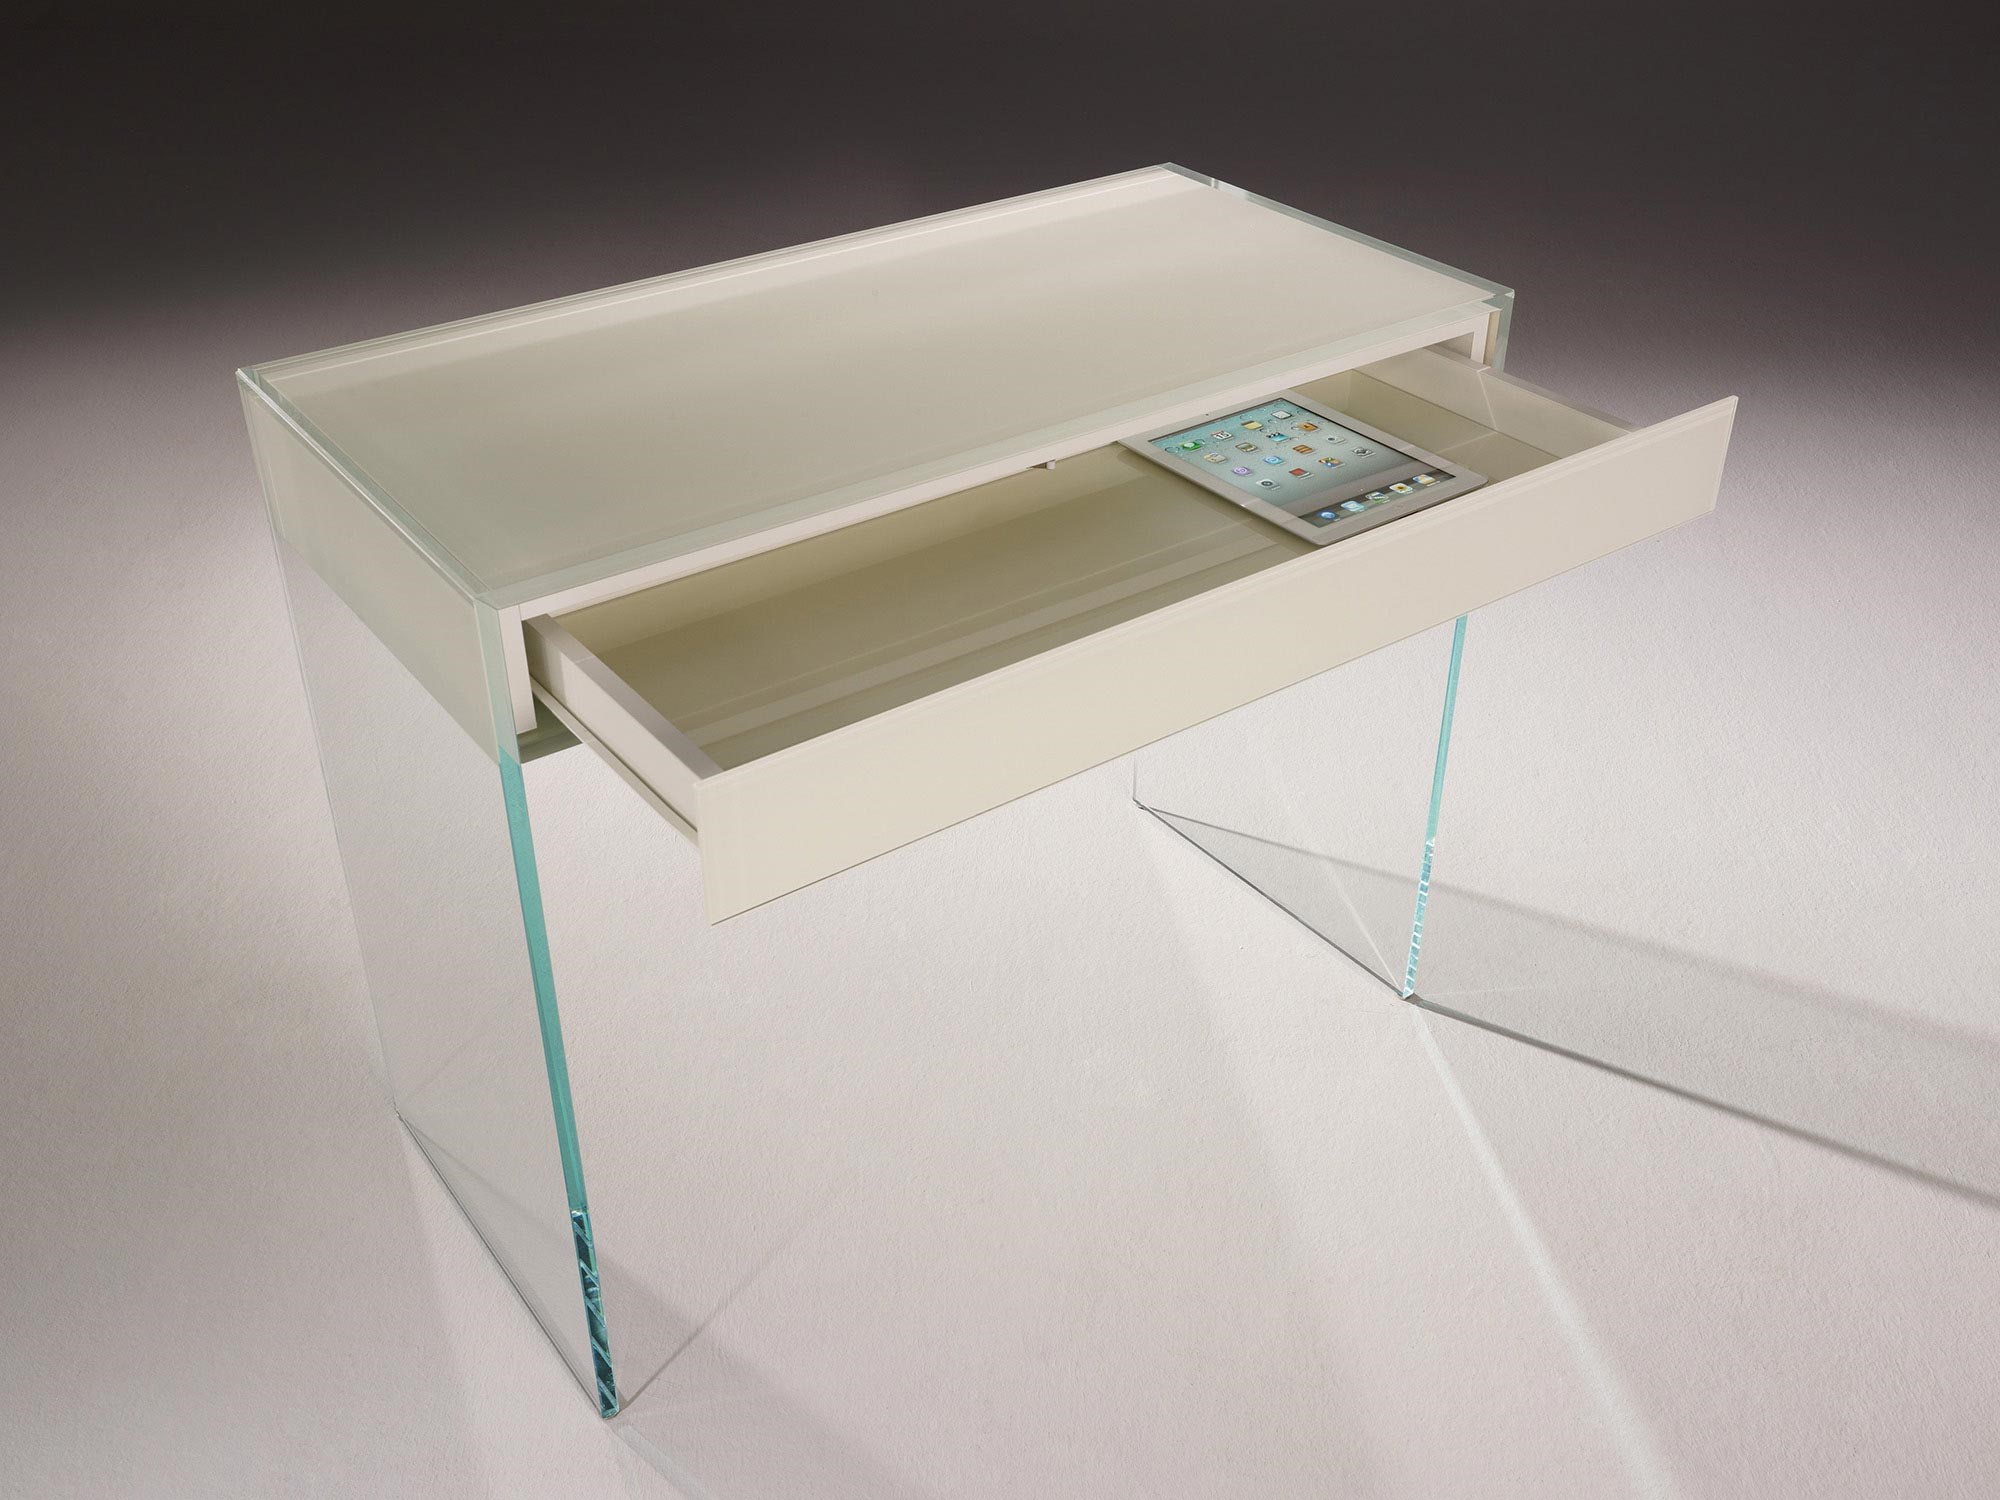 Glass desk with drawer JANUS TS by DREIECK DESIGN - OPTIWHITE partial color pearl white